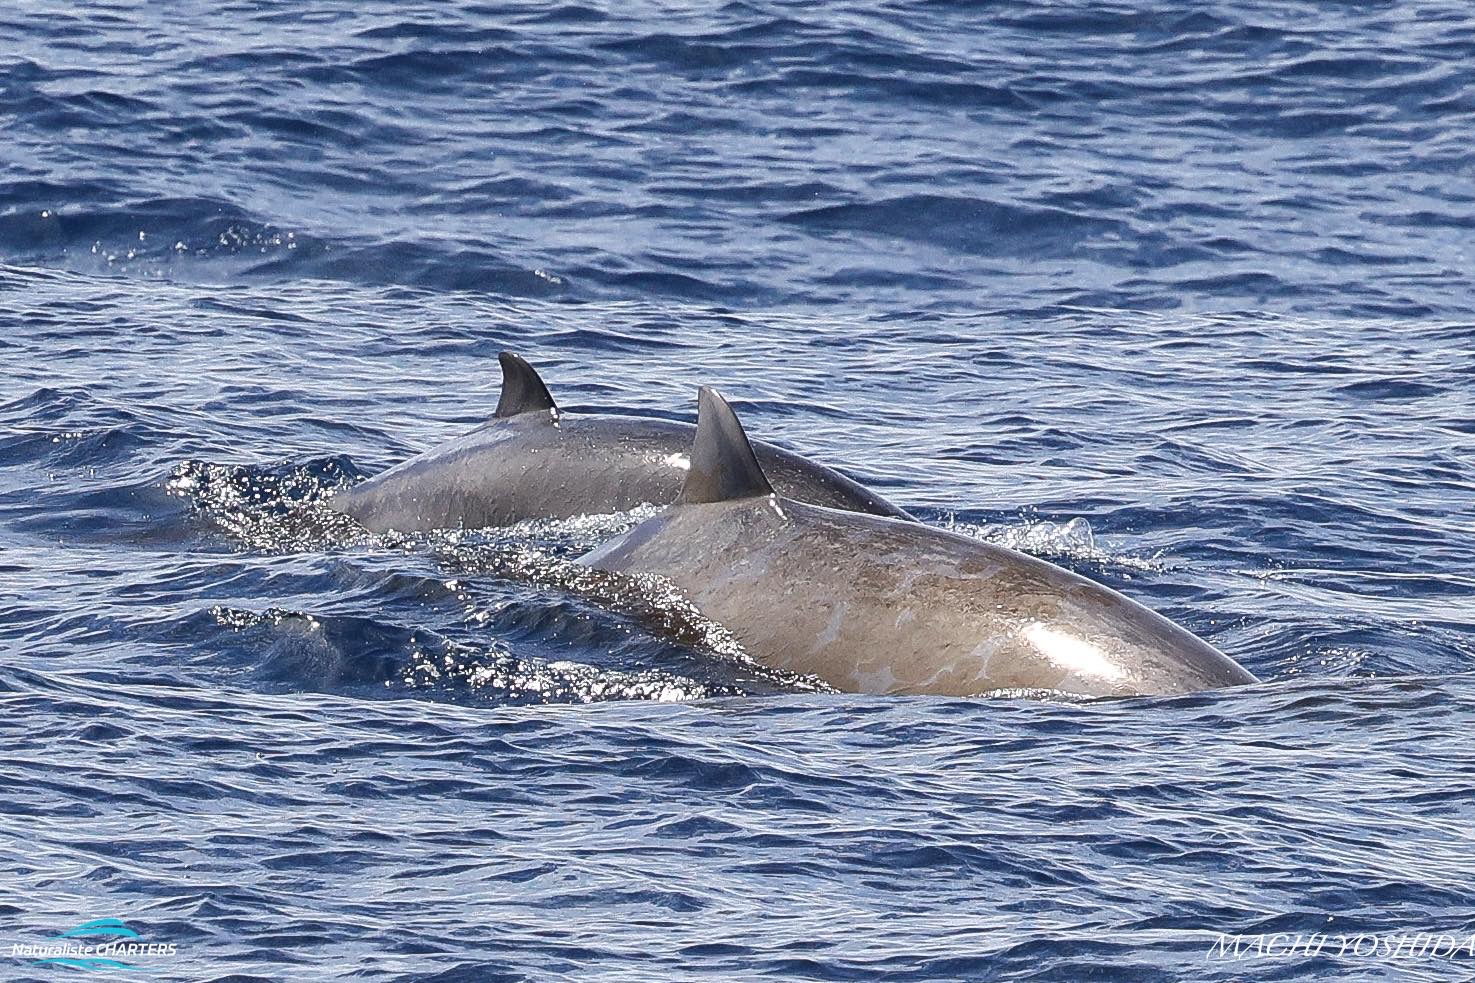 Aggregations of Pilot Whales were seen today